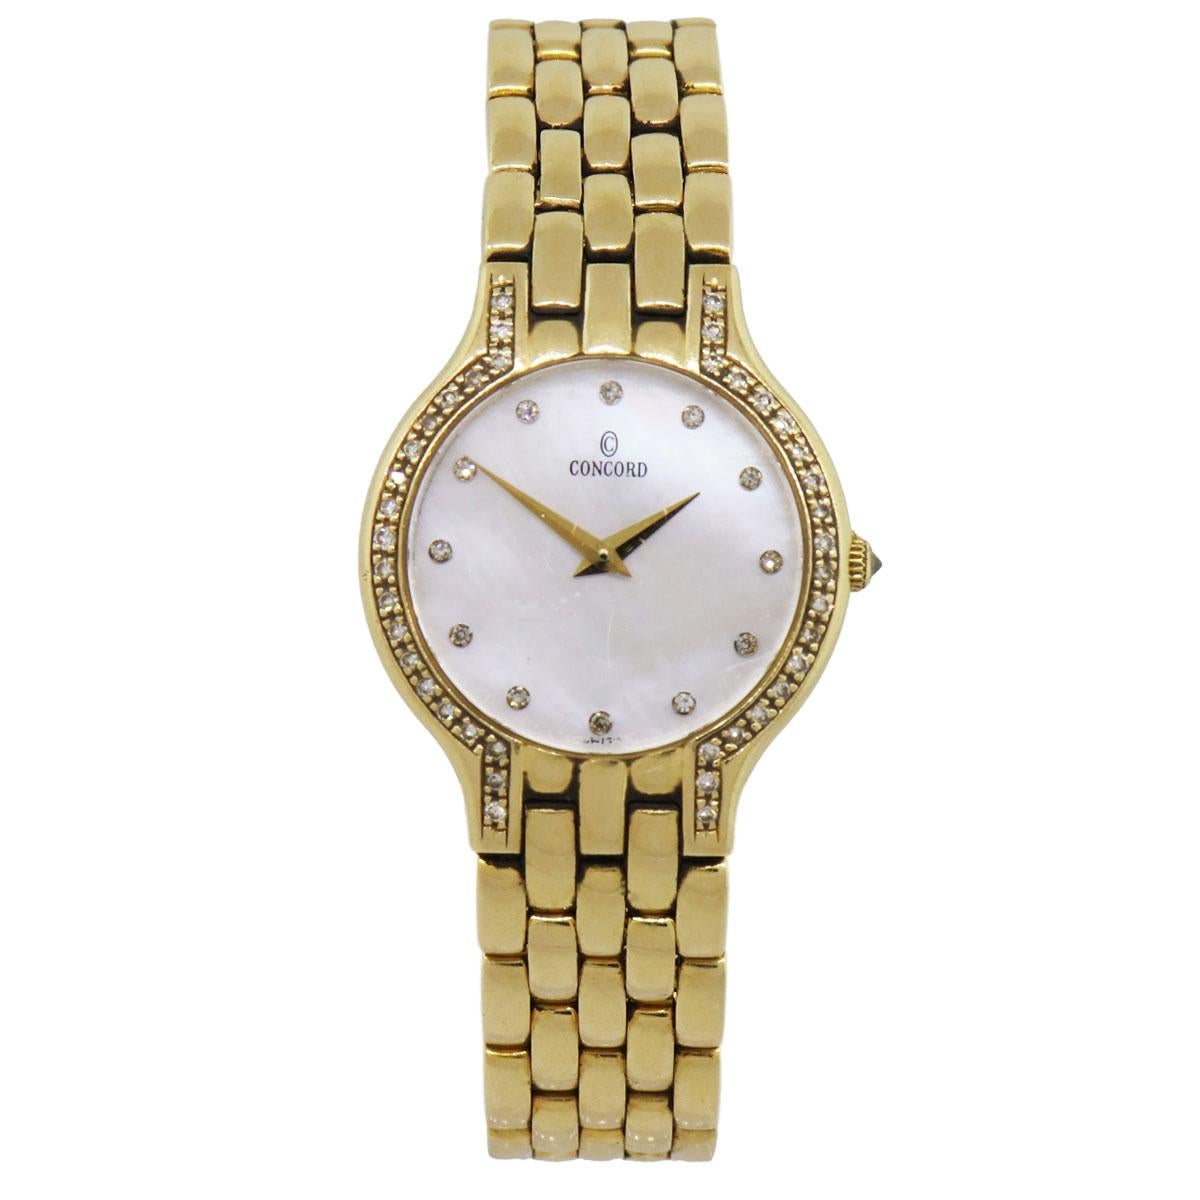 Brand: Concord
MPN: 29-62-266
Model: Les Palais
Case Material: 14k yellow gold
Case Diameter: 25mm
Bezel: Round brilliant diamond bezel
Dial: Mother of pearl diamond dial
Bracelet: 14k yellow gold
Crystal: Sapphire crystal
Size: Will fit up to a